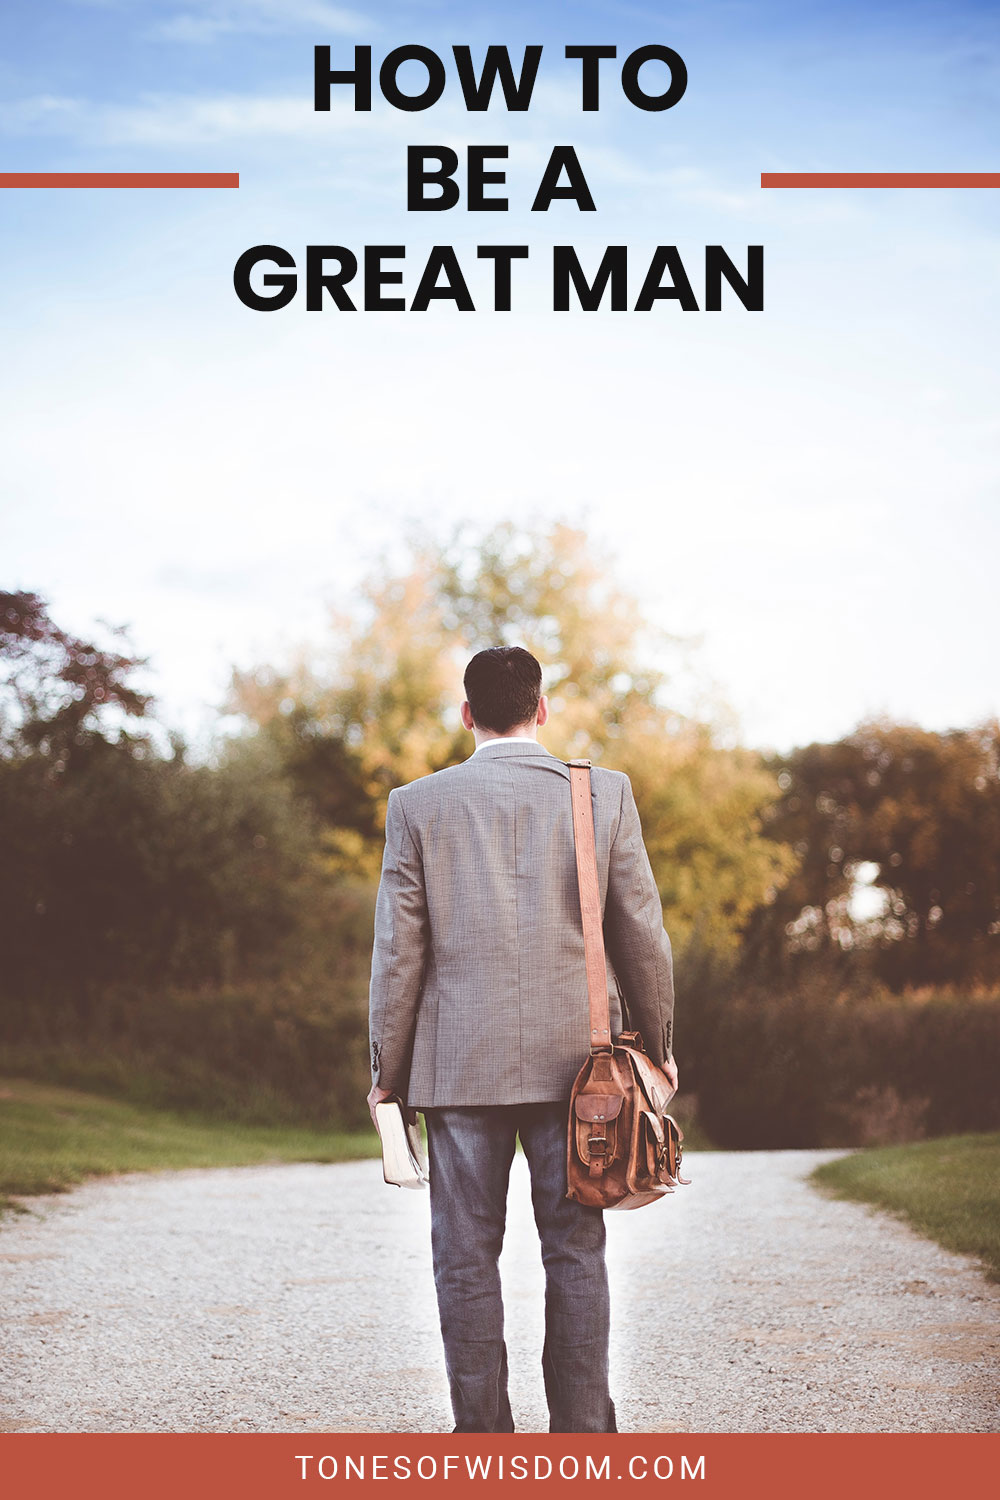 Man in grey suit and leather bag on his shoulder walking on a path - How To Be a Great Man?